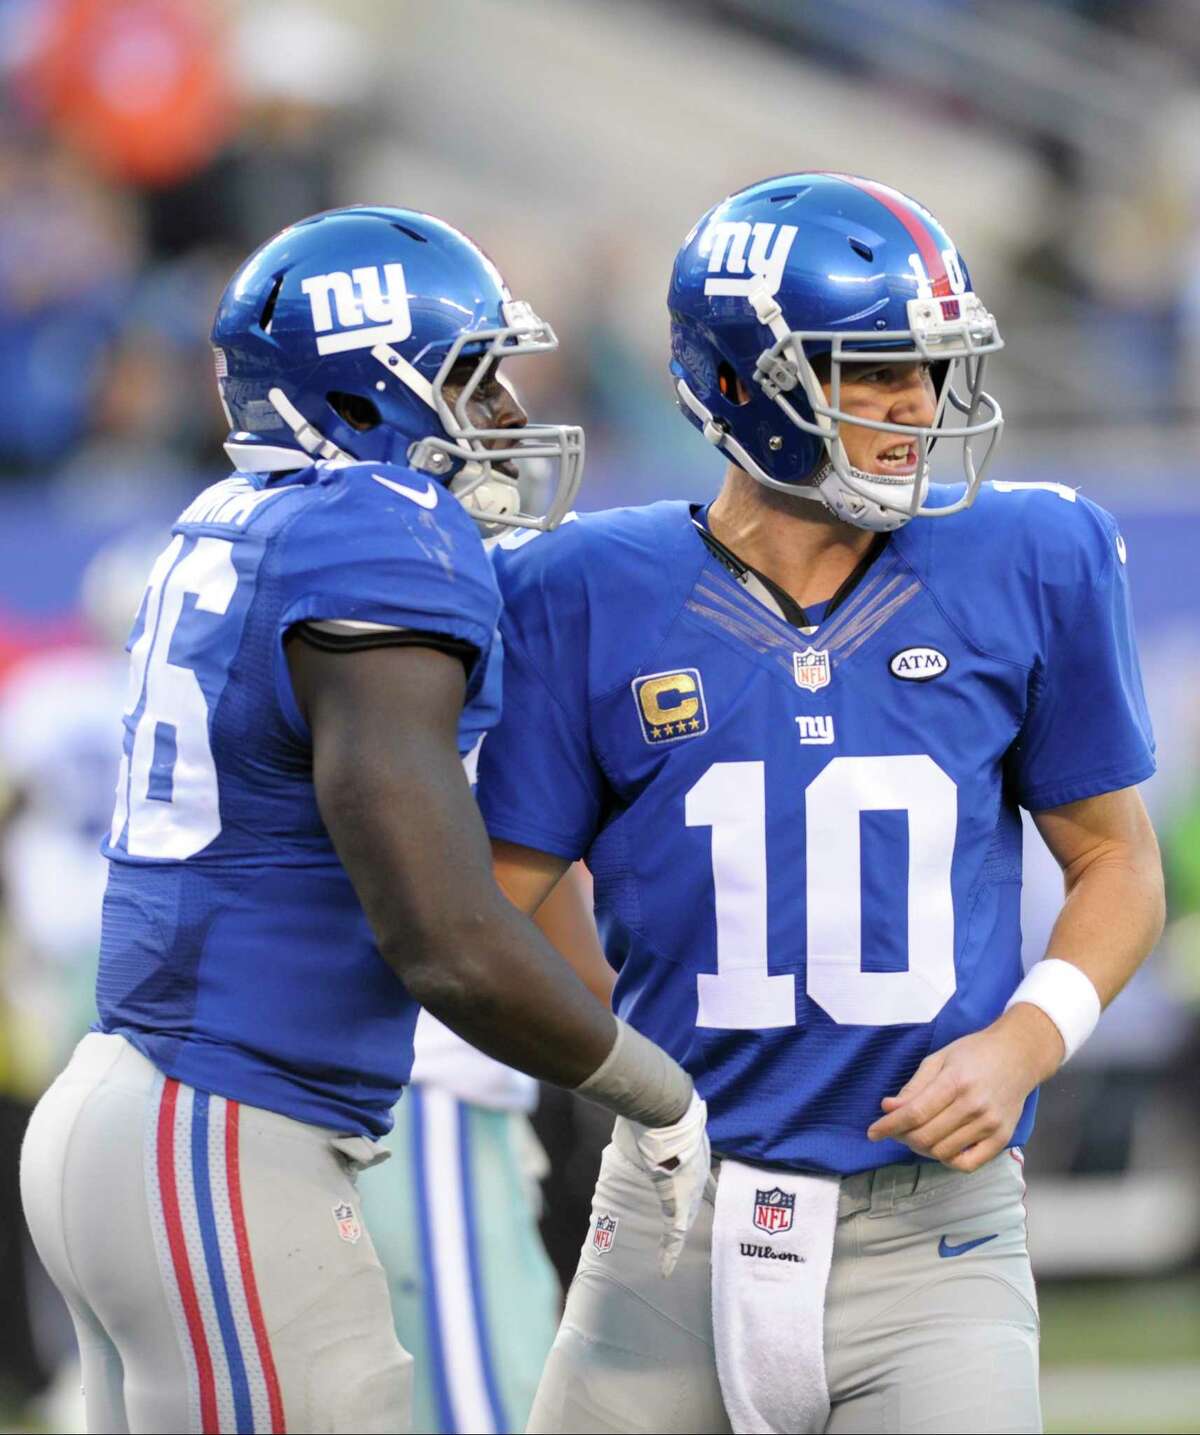 New York Giants running back Orleans Darkwa (26) celebrates with quarterback Eli Manning after rushing for a touchdown against the Dallas Cowboys last Sunday in East Rutherford, N.J.